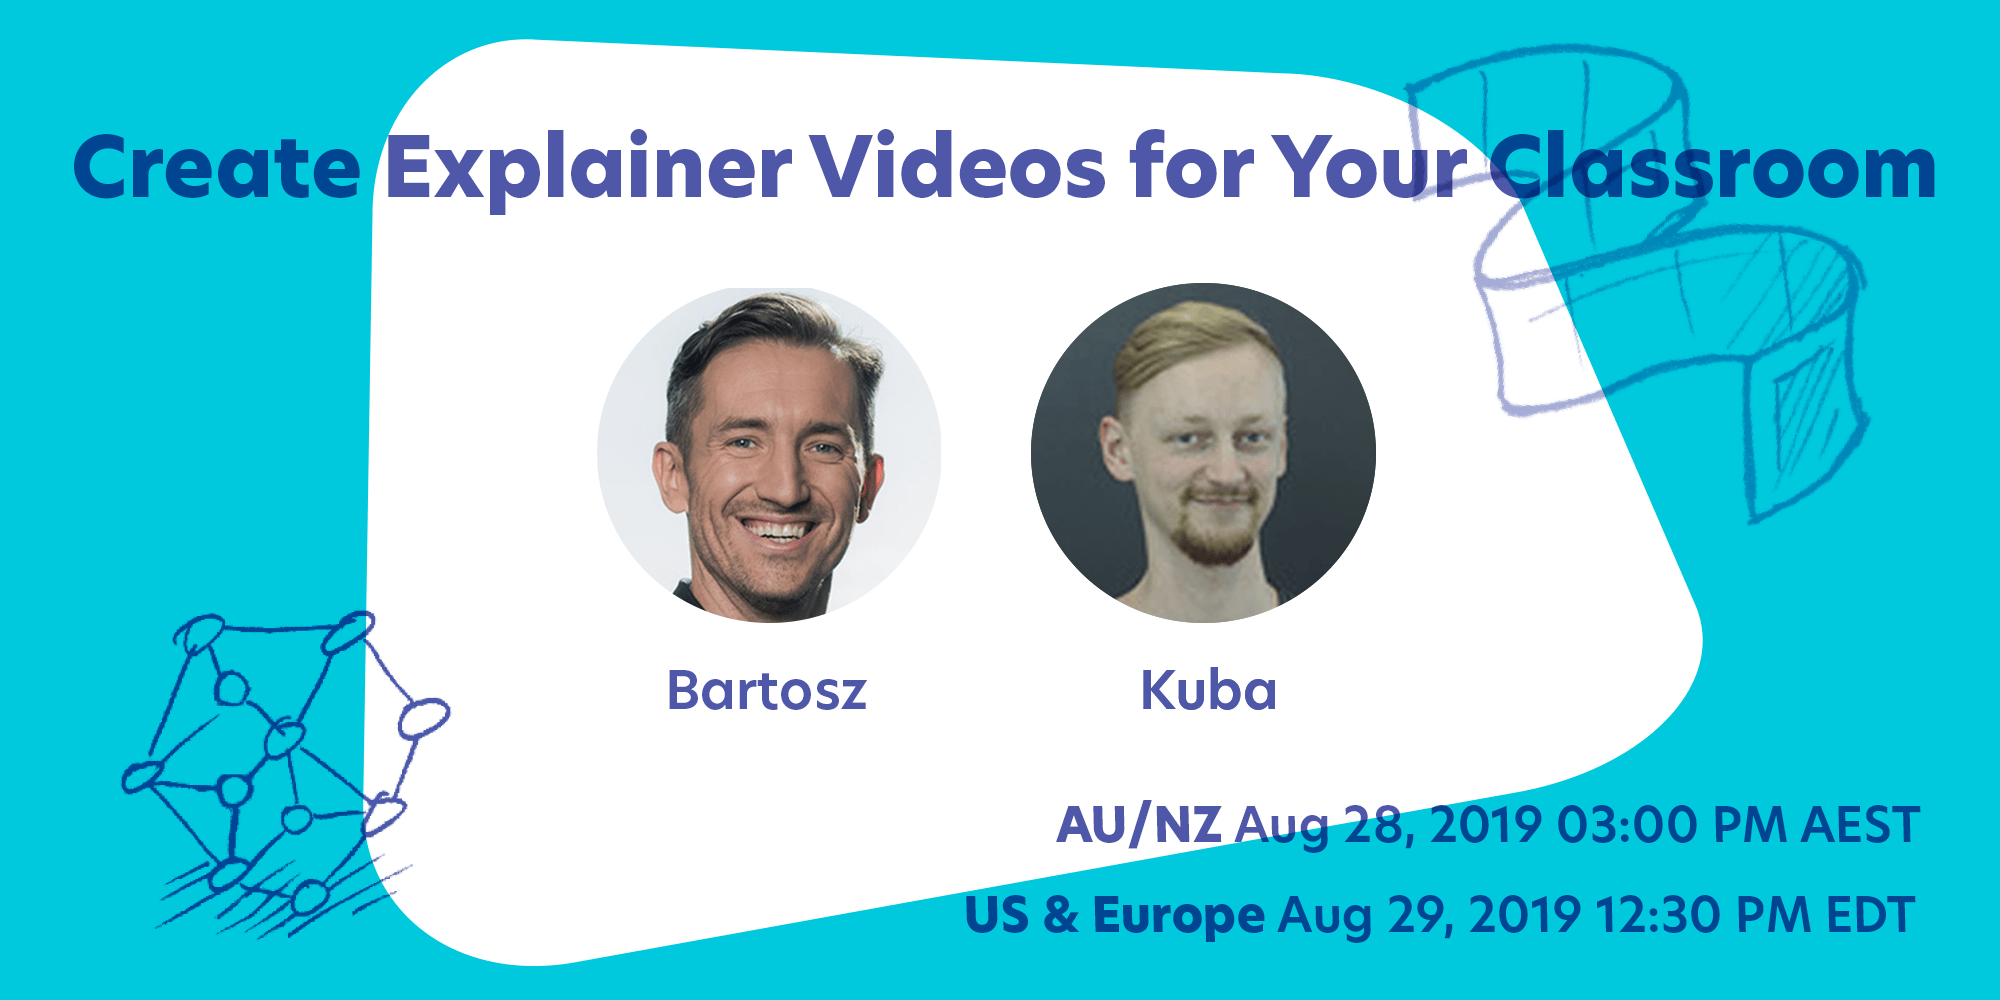 Create Explainer Videos for your Classroom webinar cover image